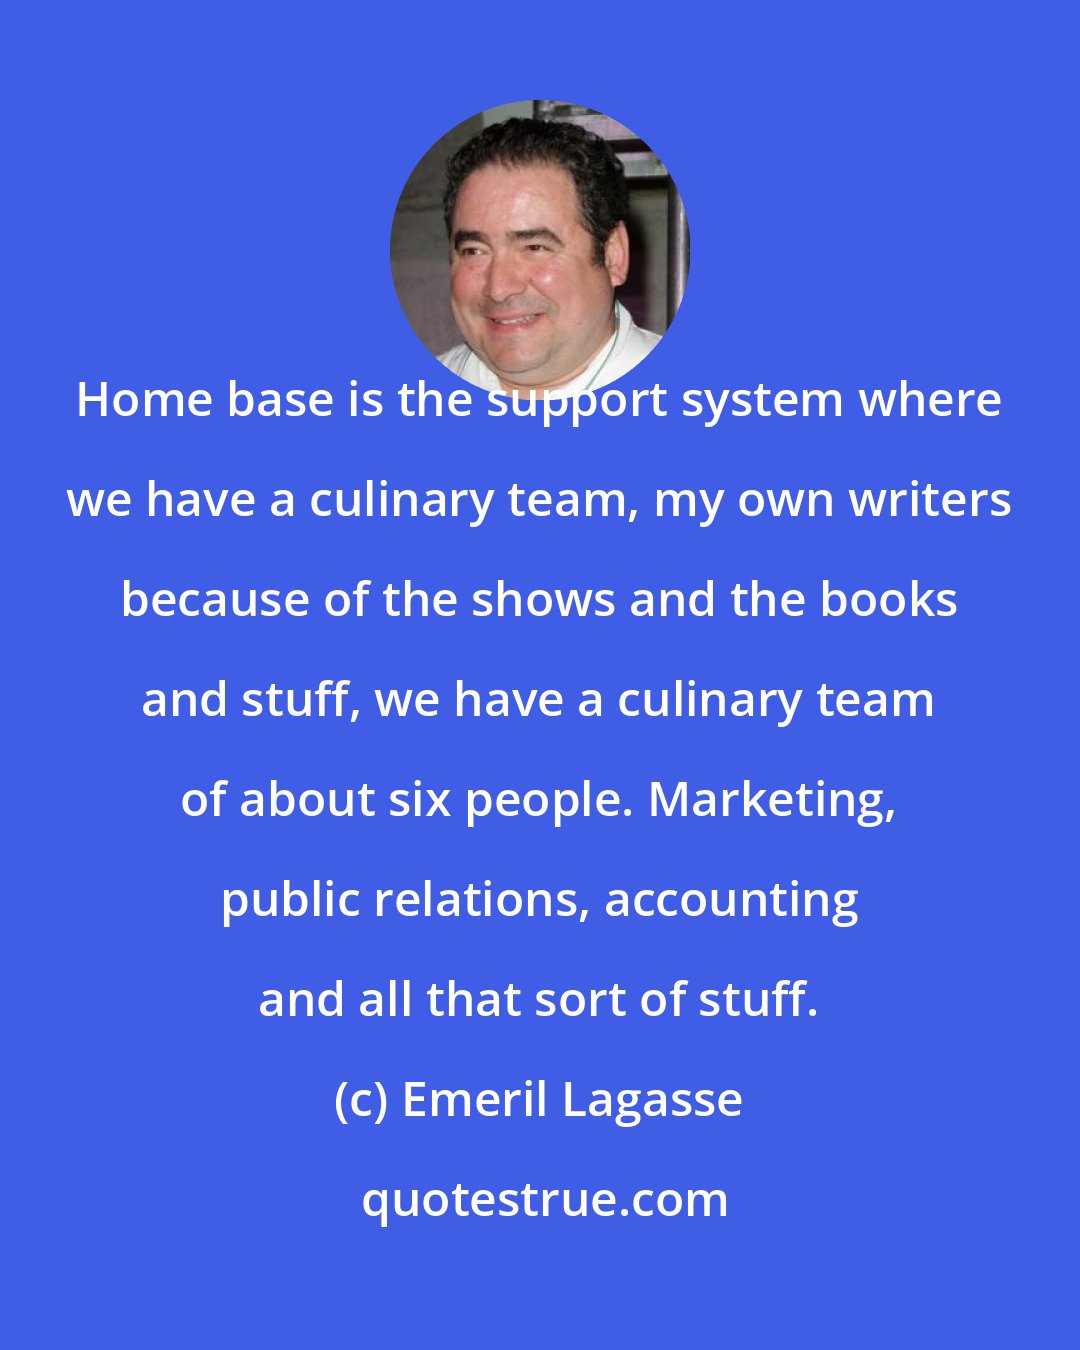 Emeril Lagasse: Home base is the support system where we have a culinary team, my own writers because of the shows and the books and stuff, we have a culinary team of about six people. Marketing, public relations, accounting and all that sort of stuff.